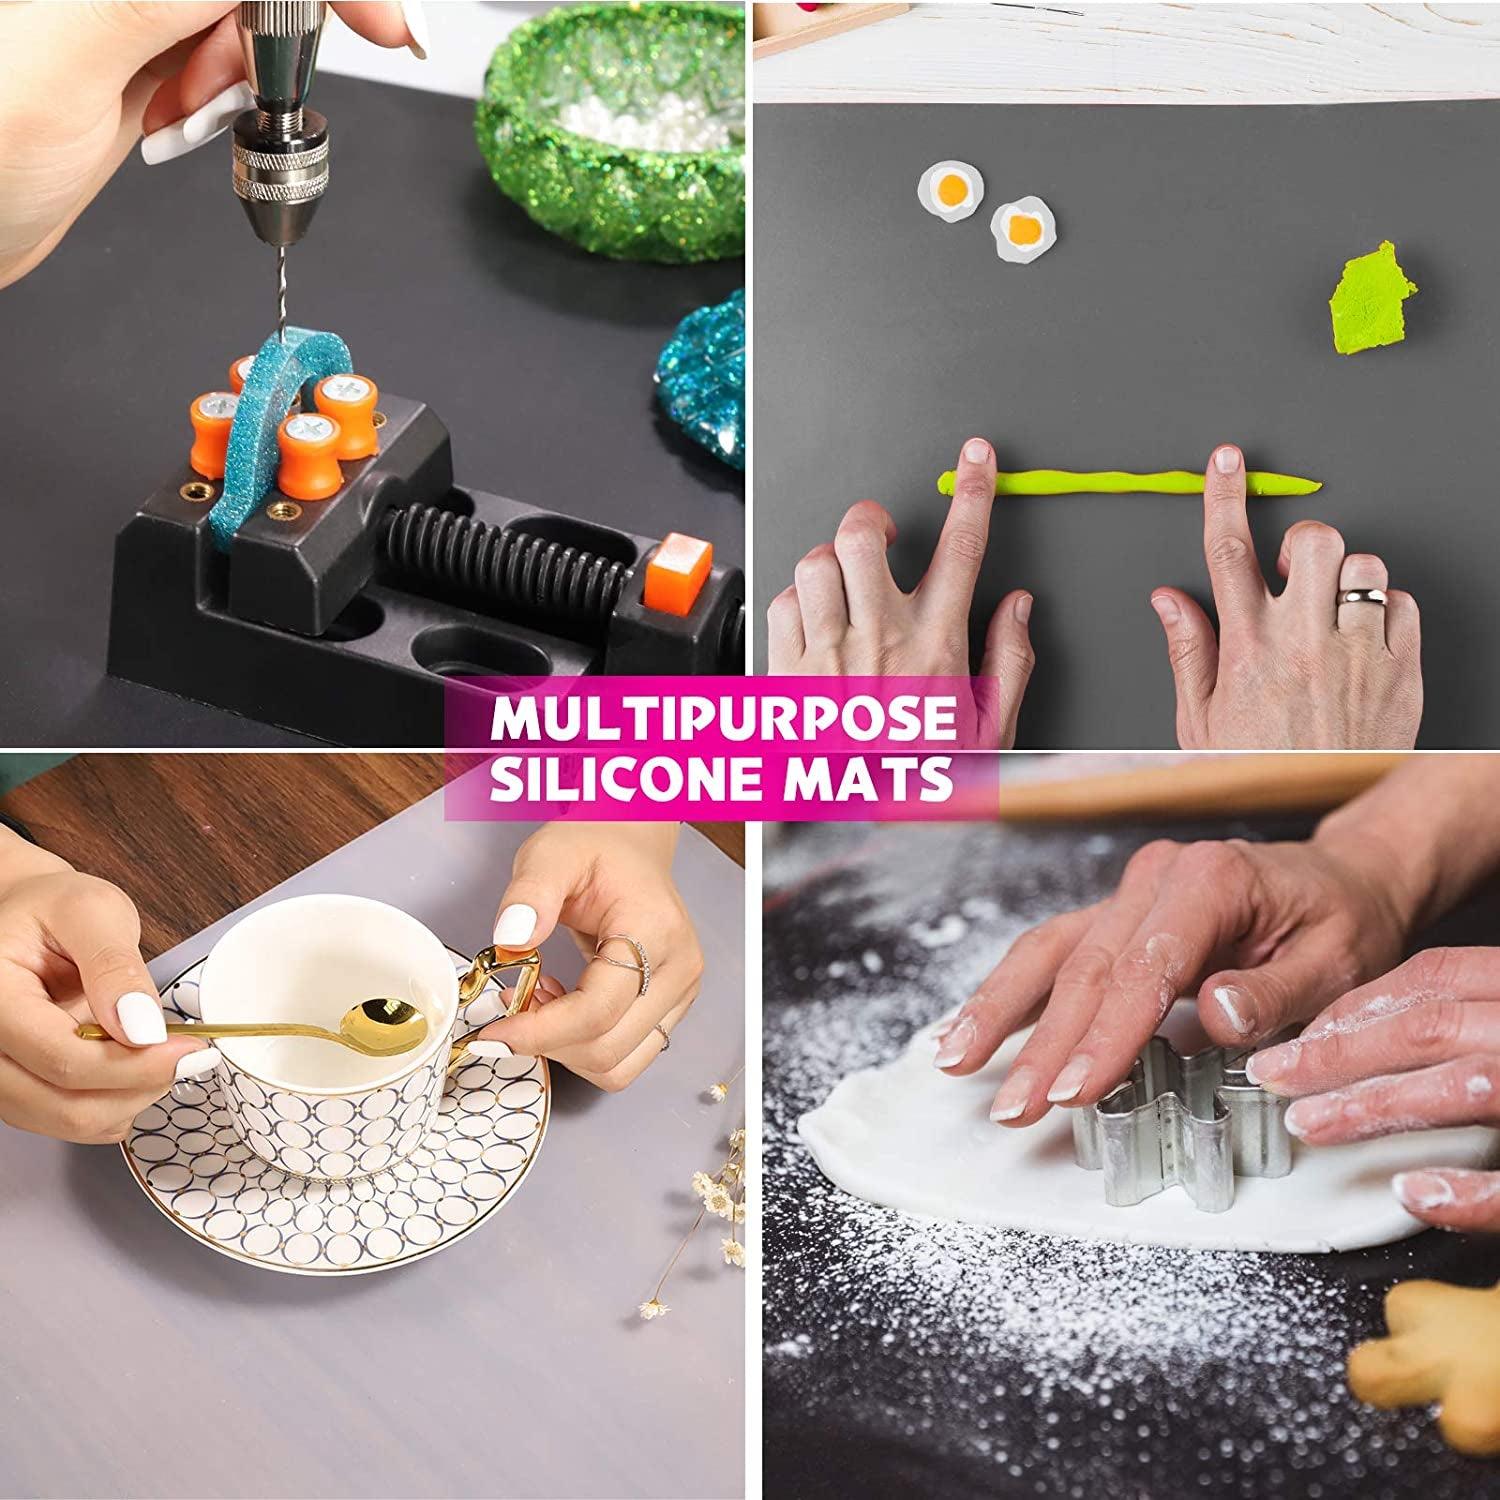  LET'S RESIN 3Pcs Silicone Mat for Crafts, 15.7 x 11.7  Nonstick & Nonslip Silicone Crafts Mat, Multipurpose Heat-Resistant Table  Protector Silicone Sheets for Resin, Crafts, Liquid, Paint, Clay : Arts,  Crafts